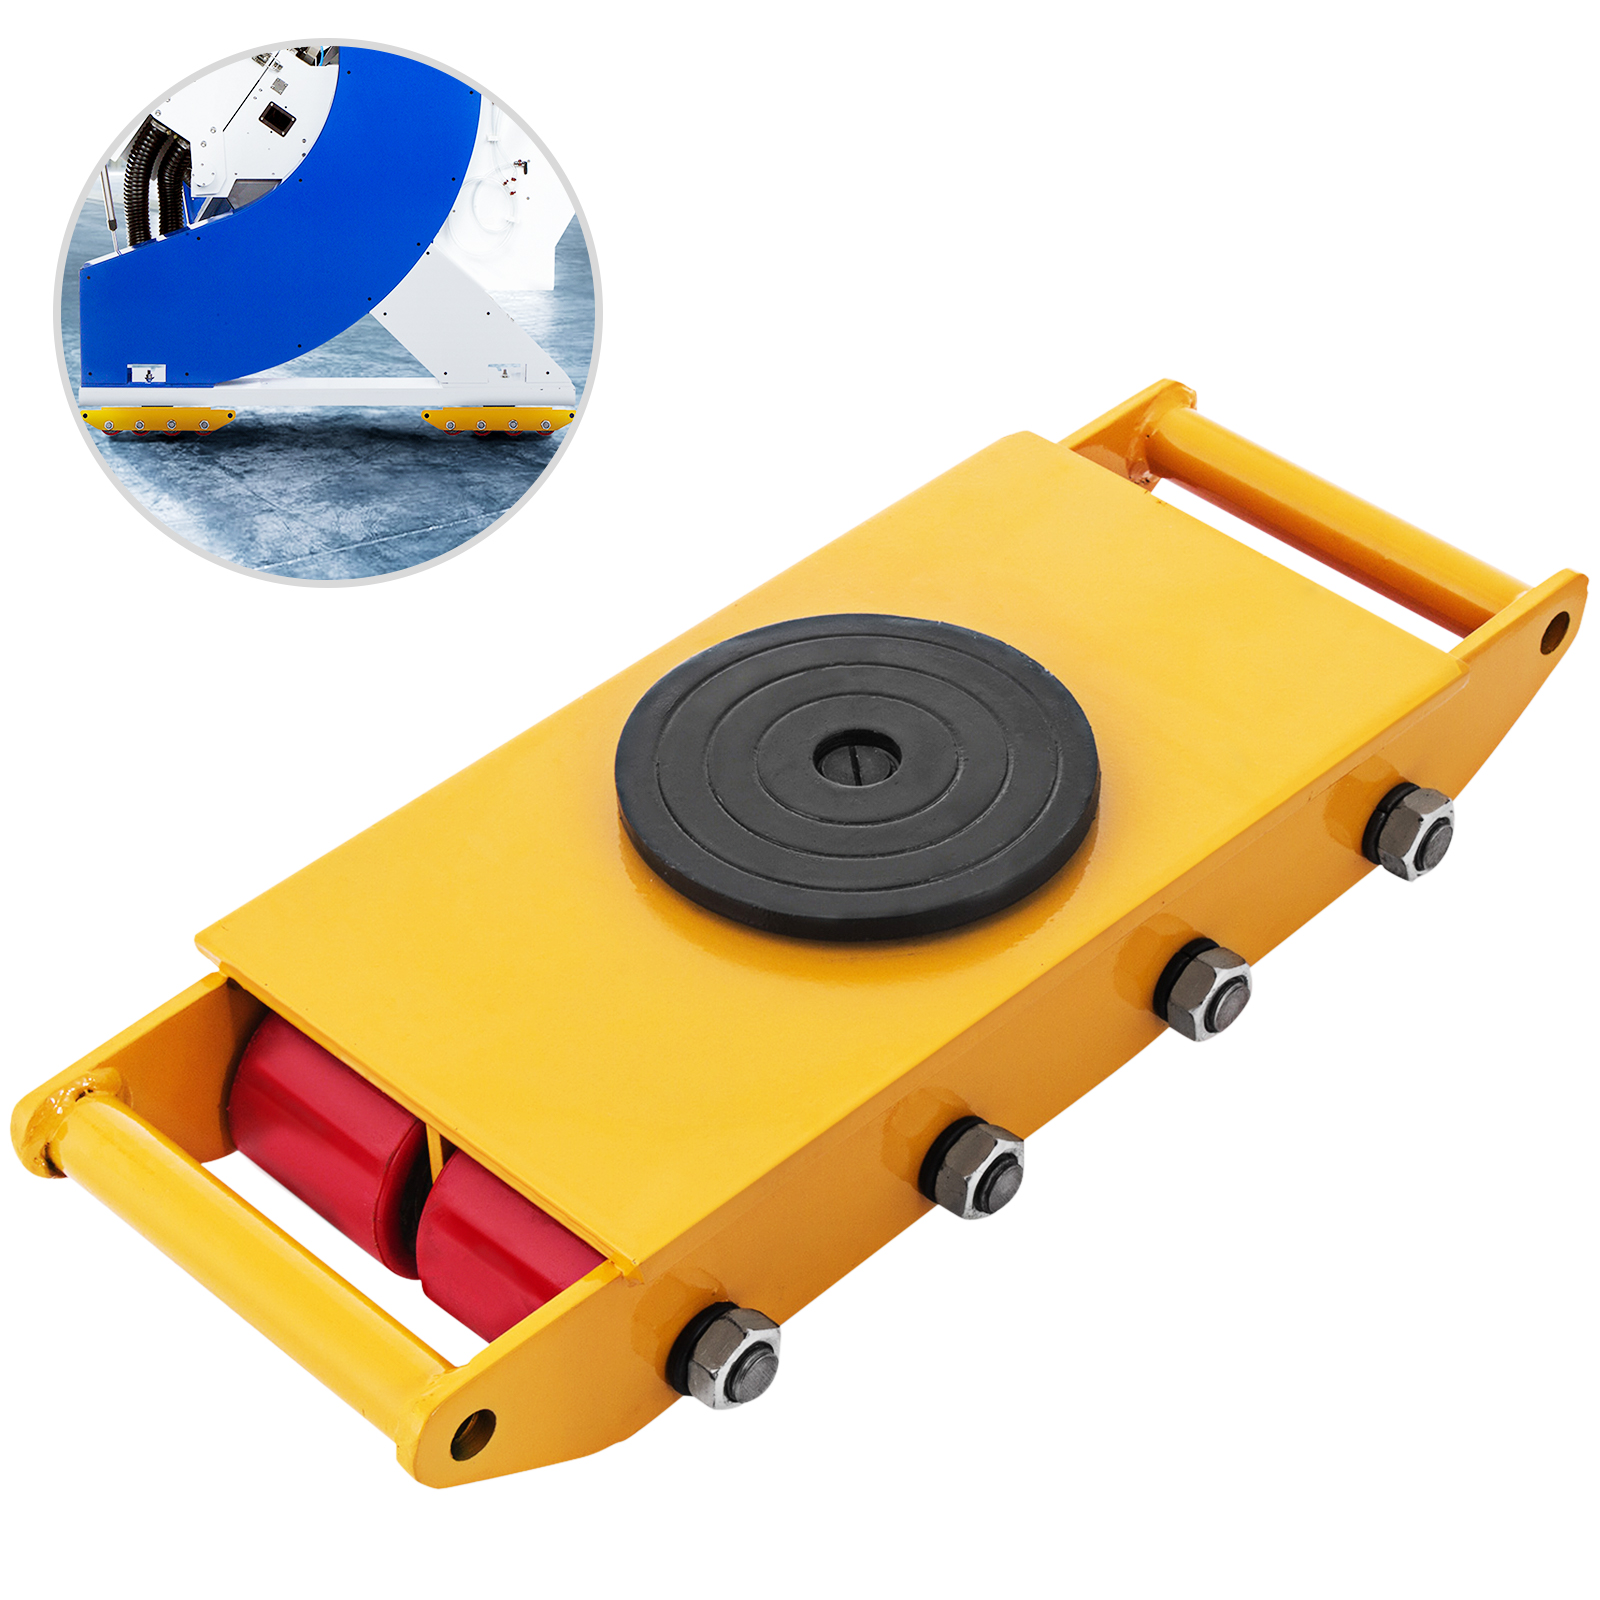 Heavy Duty Machine Dolly Skate Machinery Roller Mover Cargo Trolley 12T 26400lb 